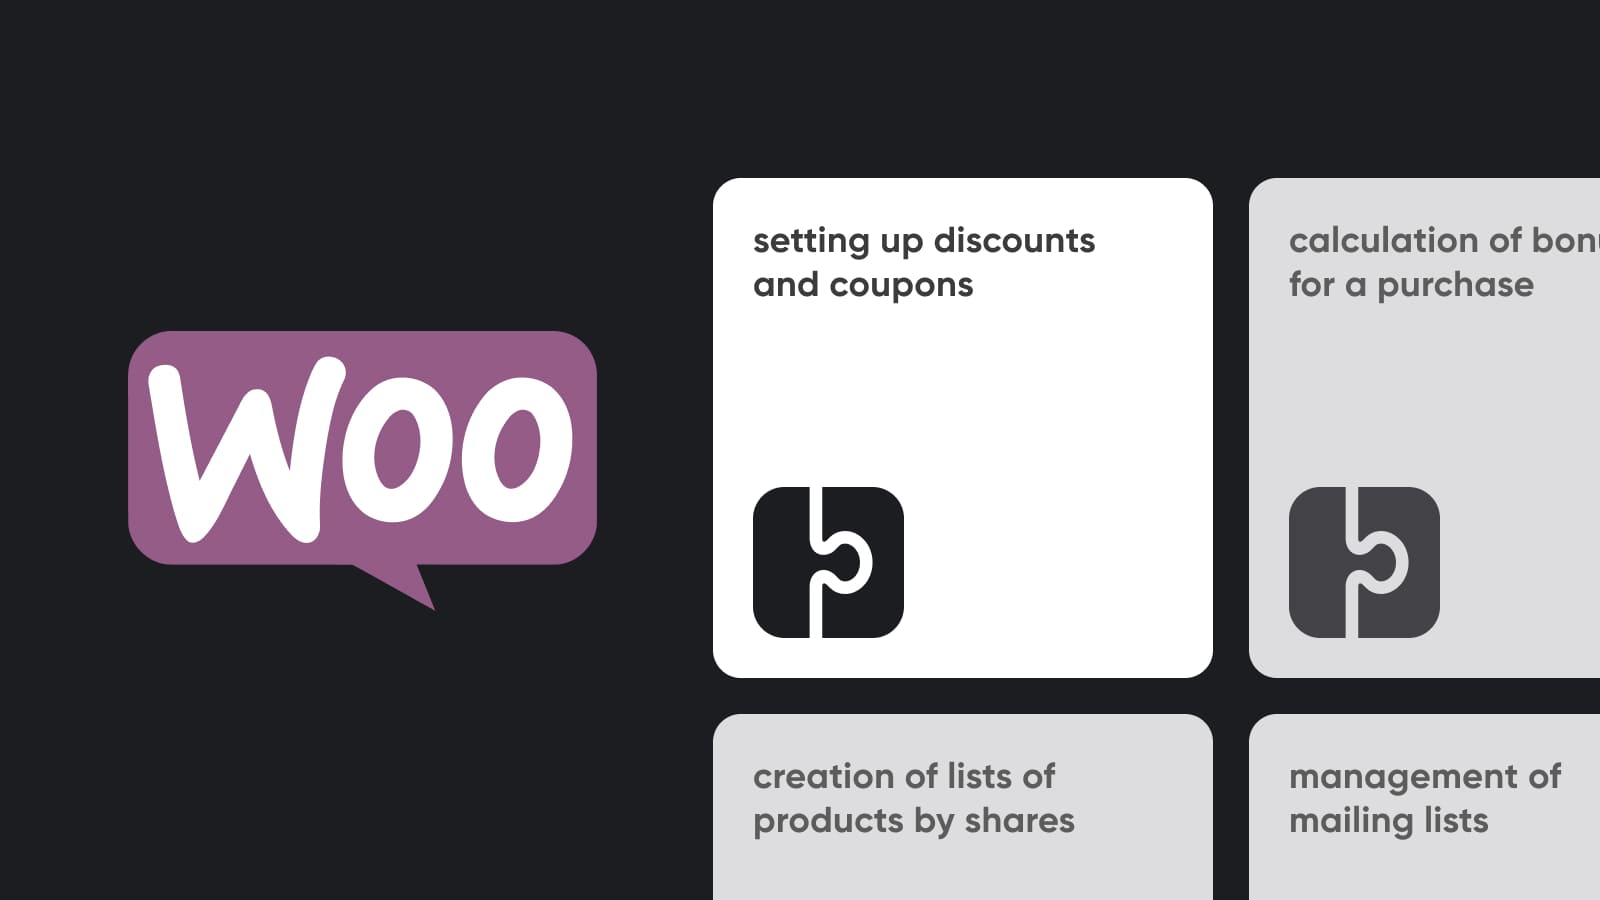 Users can build an online store WooCommerce with added plugin features.